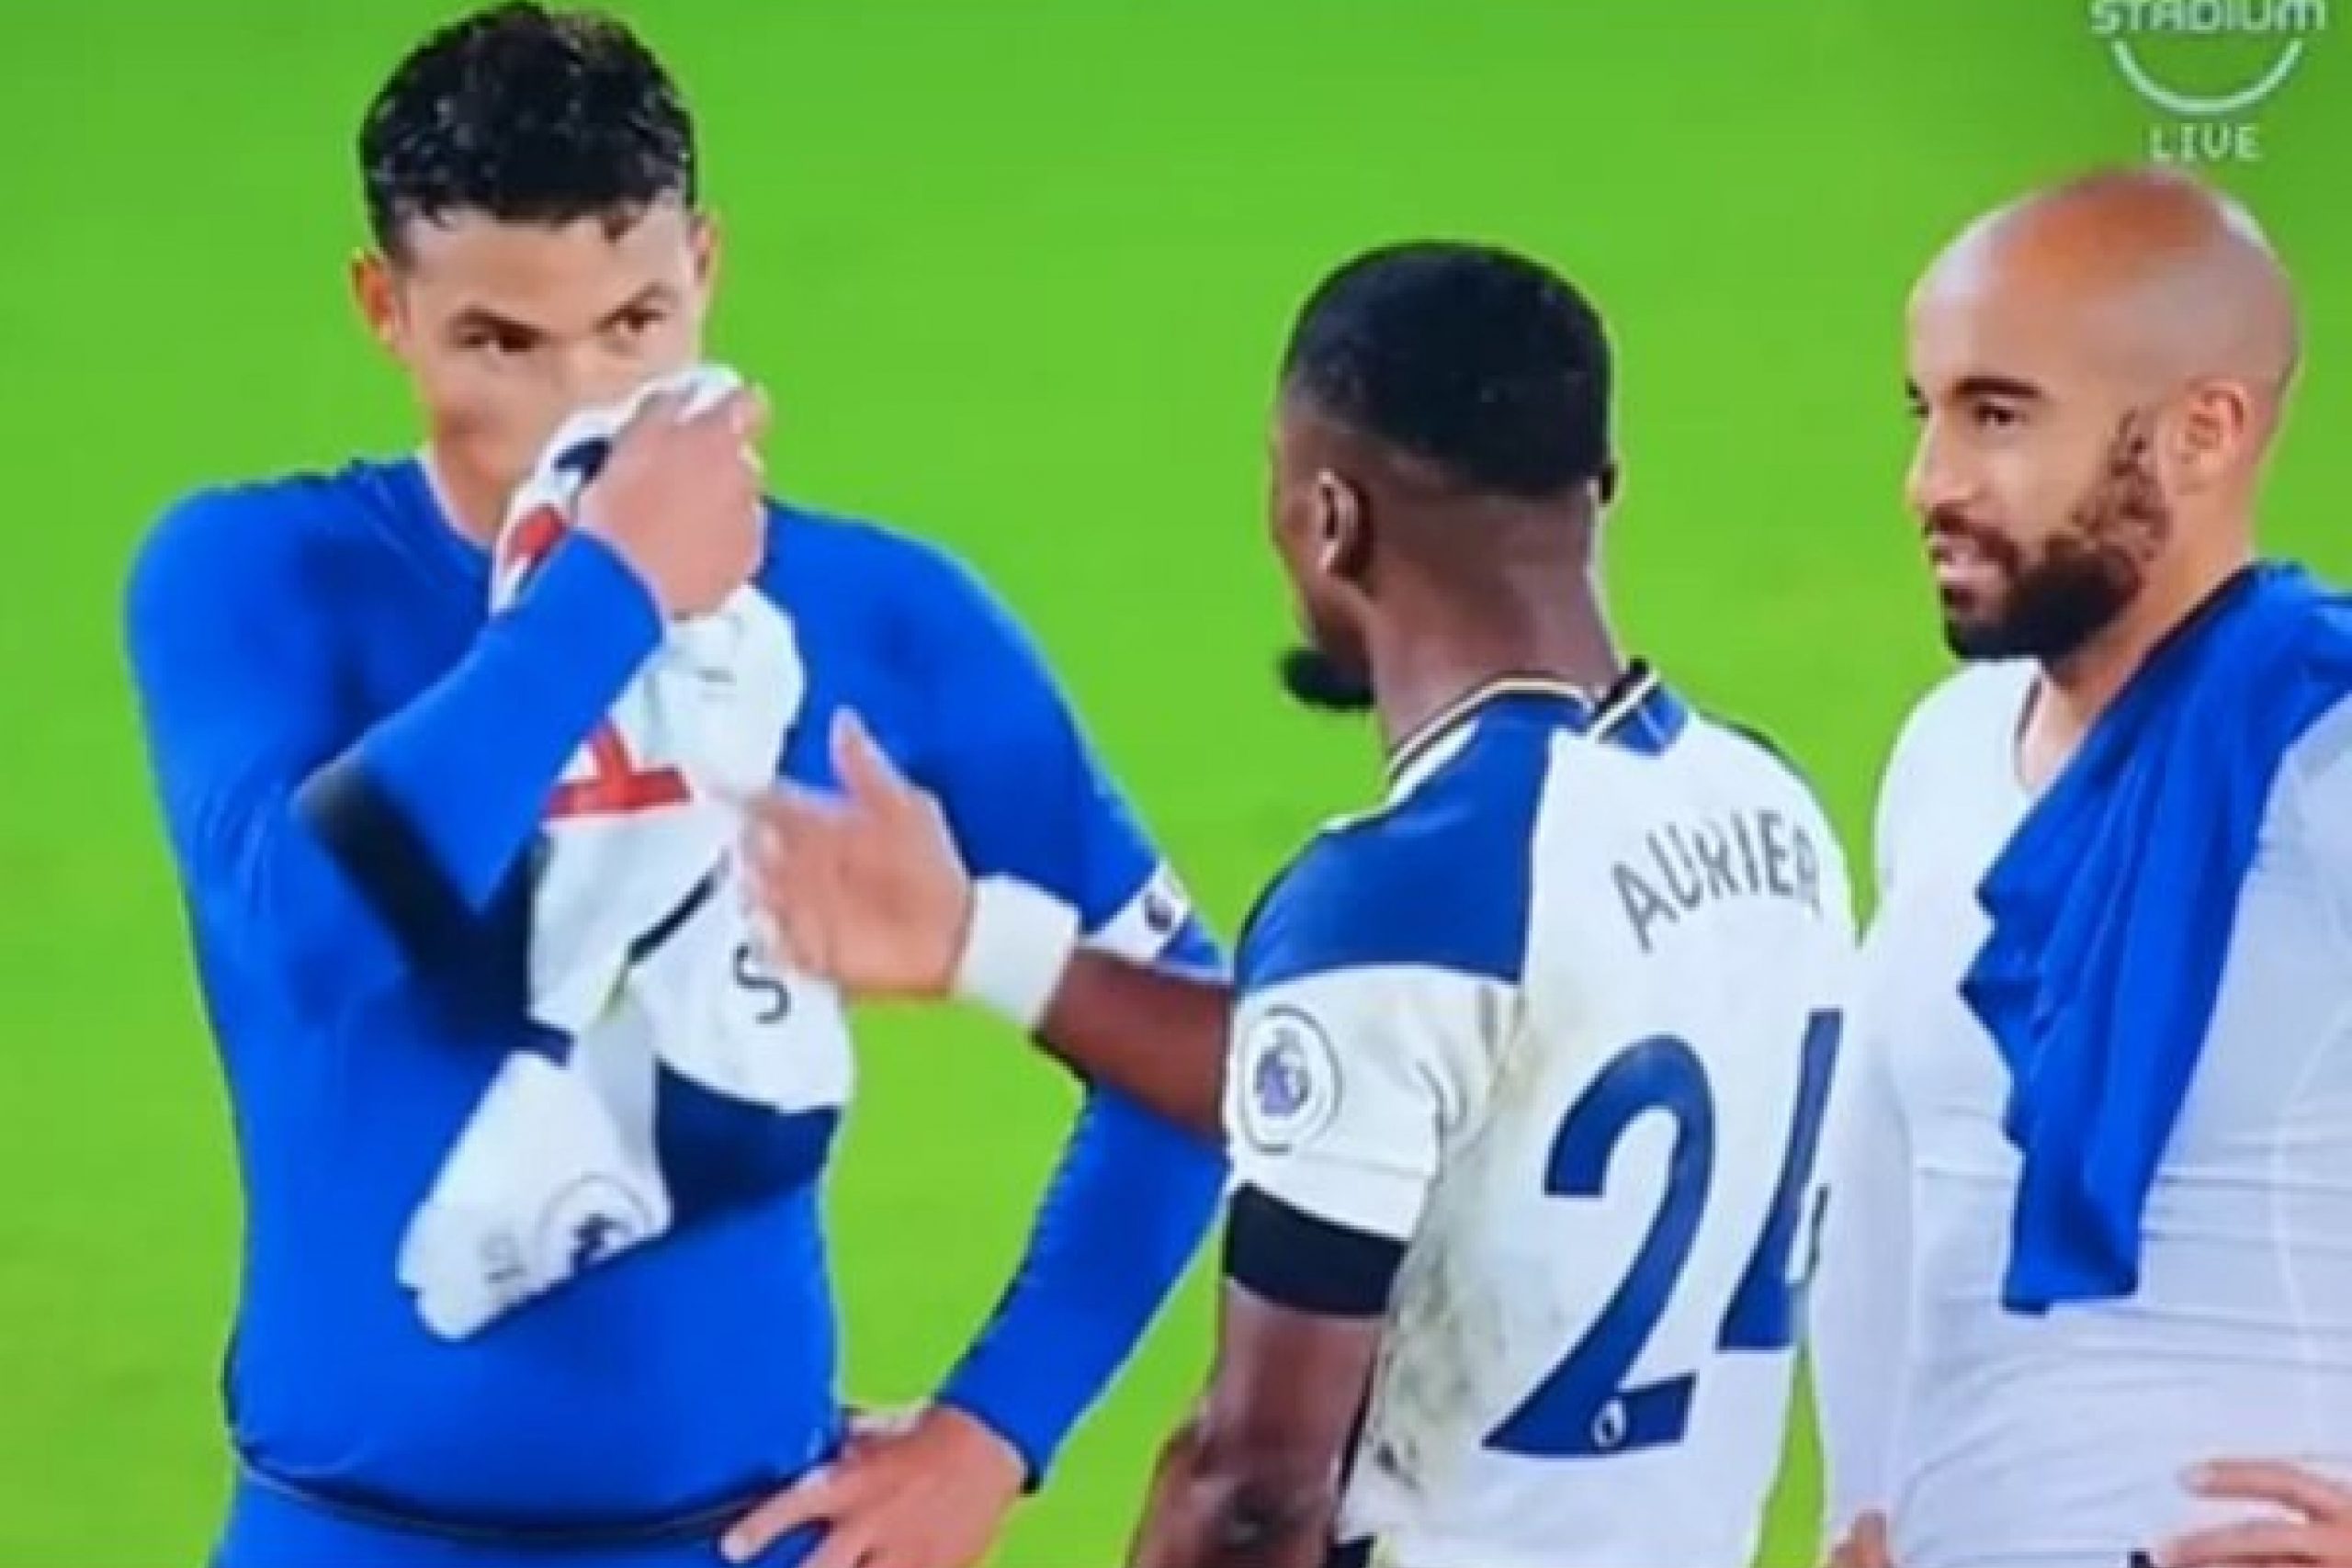 Chelsea fans react after video shows Thiago Silva wiping his nose with a Tottenham shirt at full time